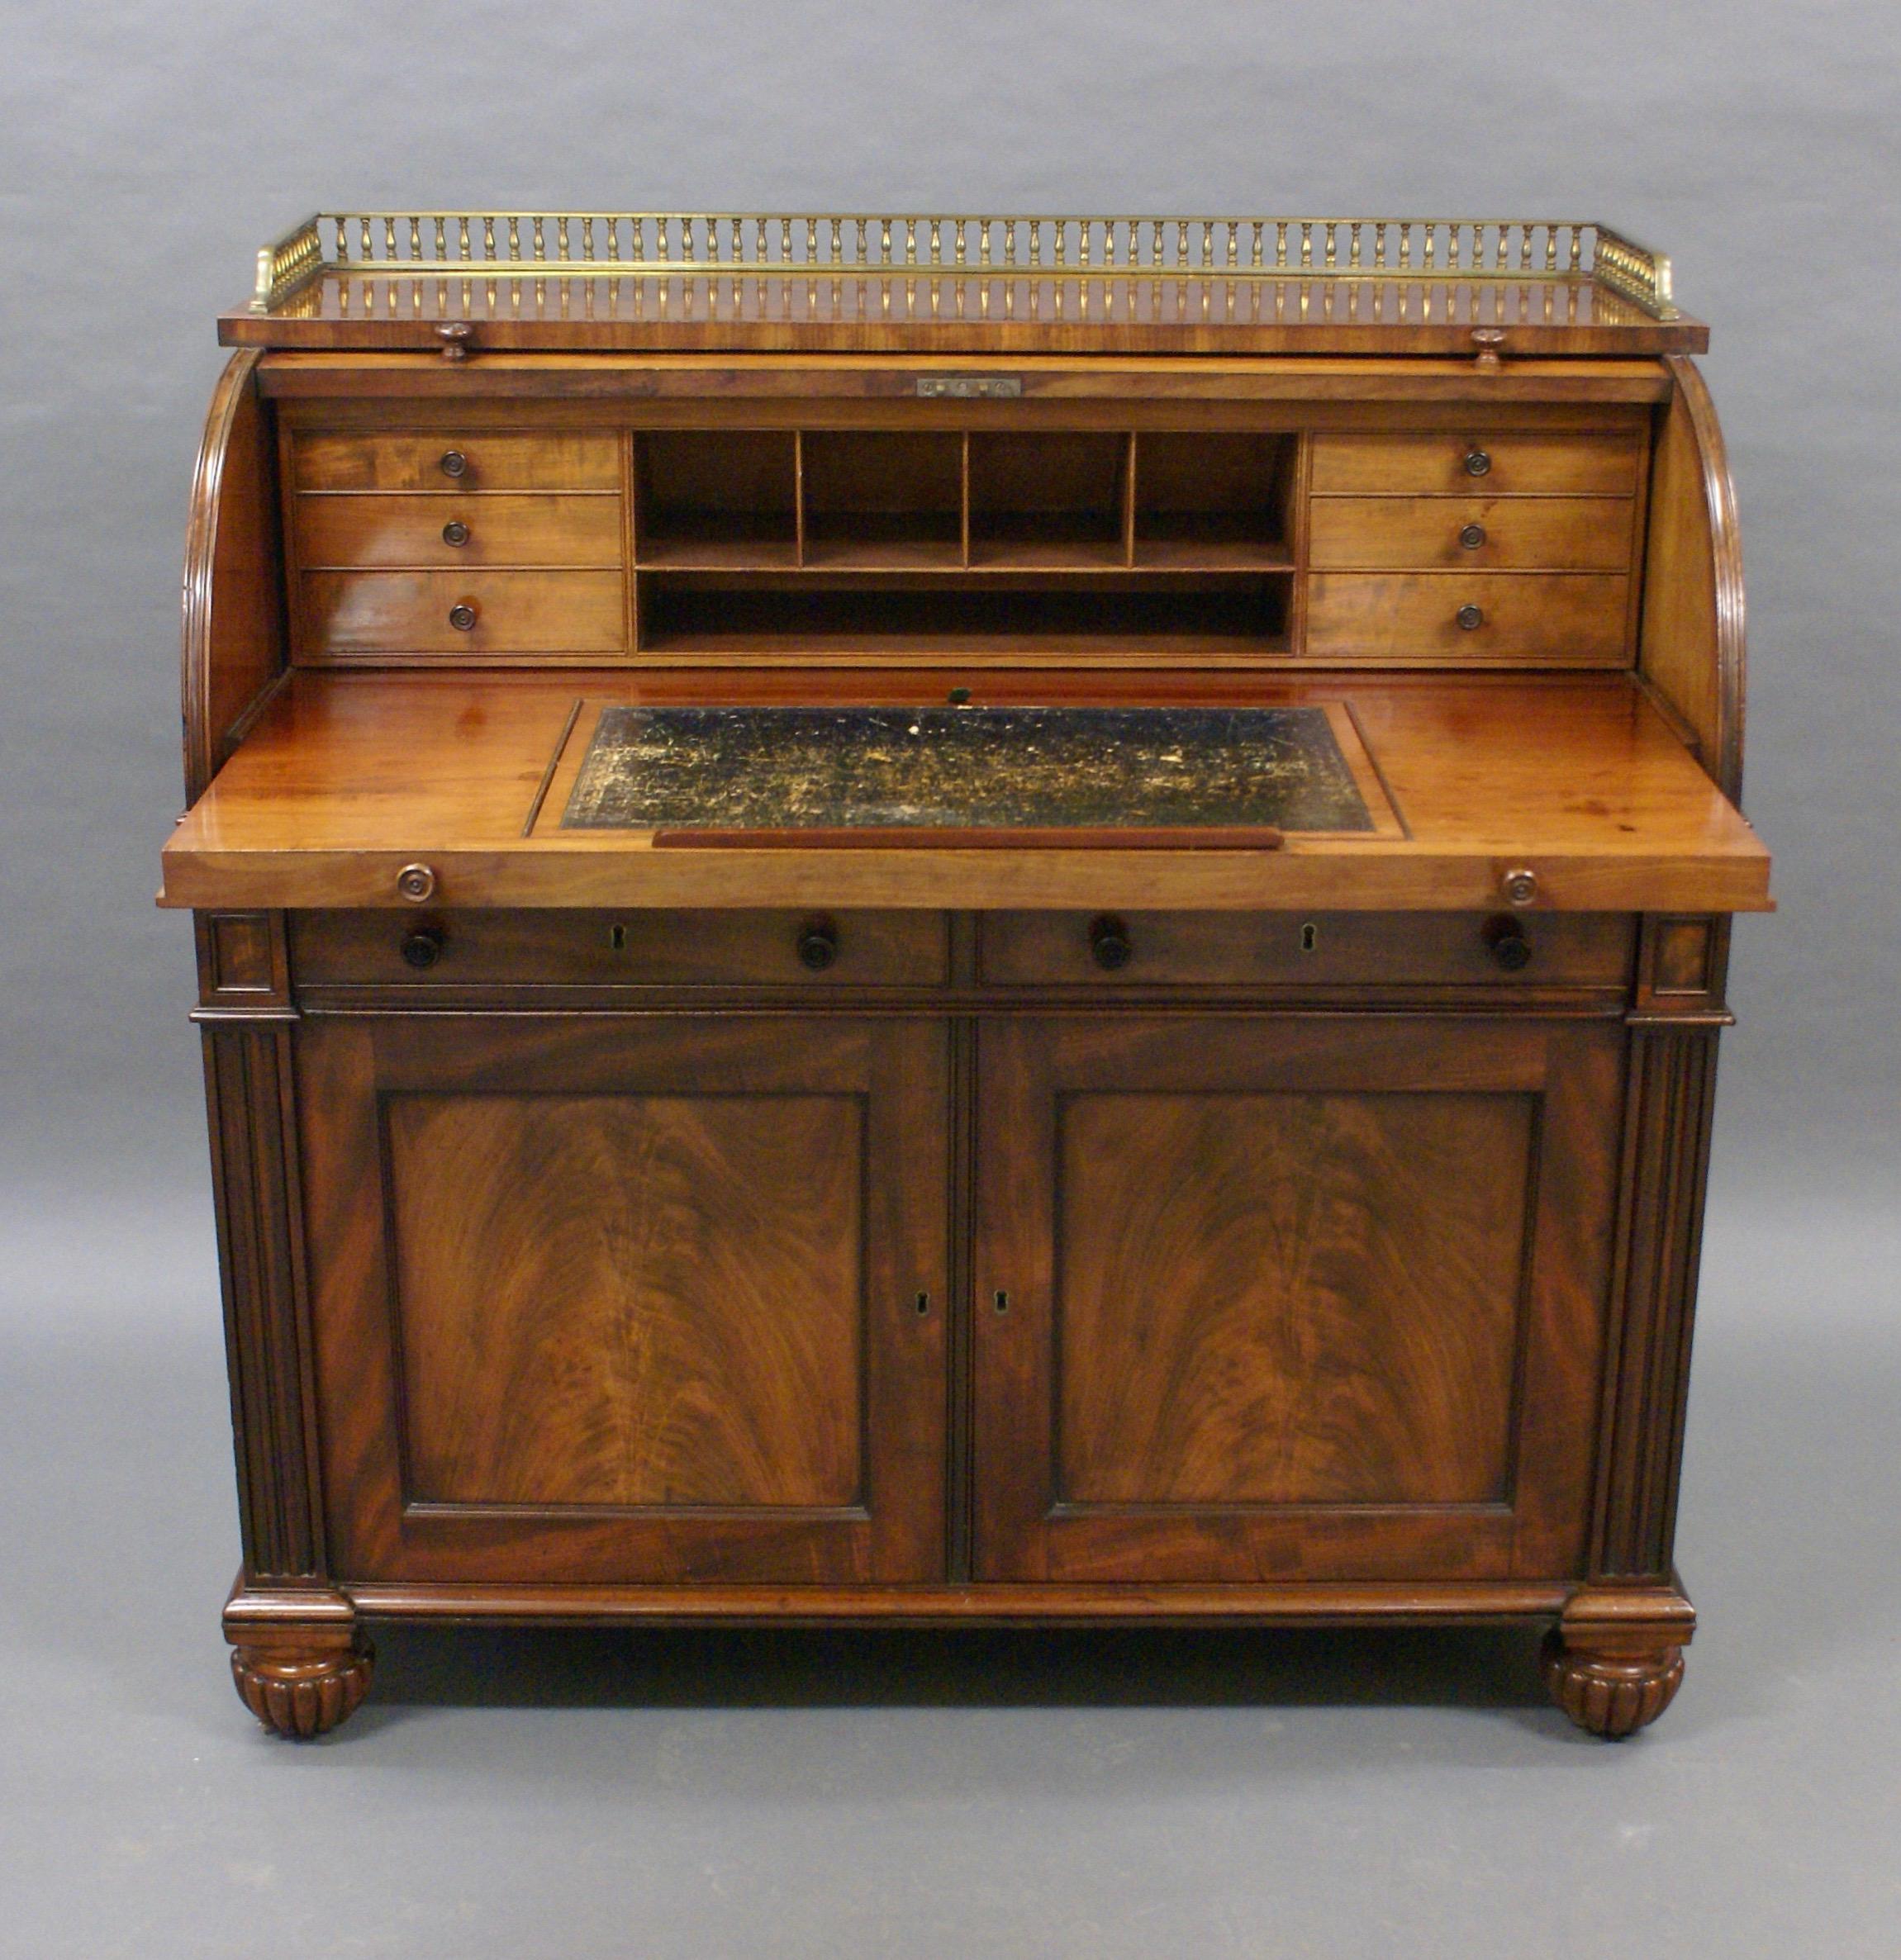 A sulperb cylinder top writing desk attributed to Gillows. The quality of the craftsmanship and materials used are second to none and typical of the Lancaster maker. Standing on reeded bun feet with inset castors above which are pilasters bordering